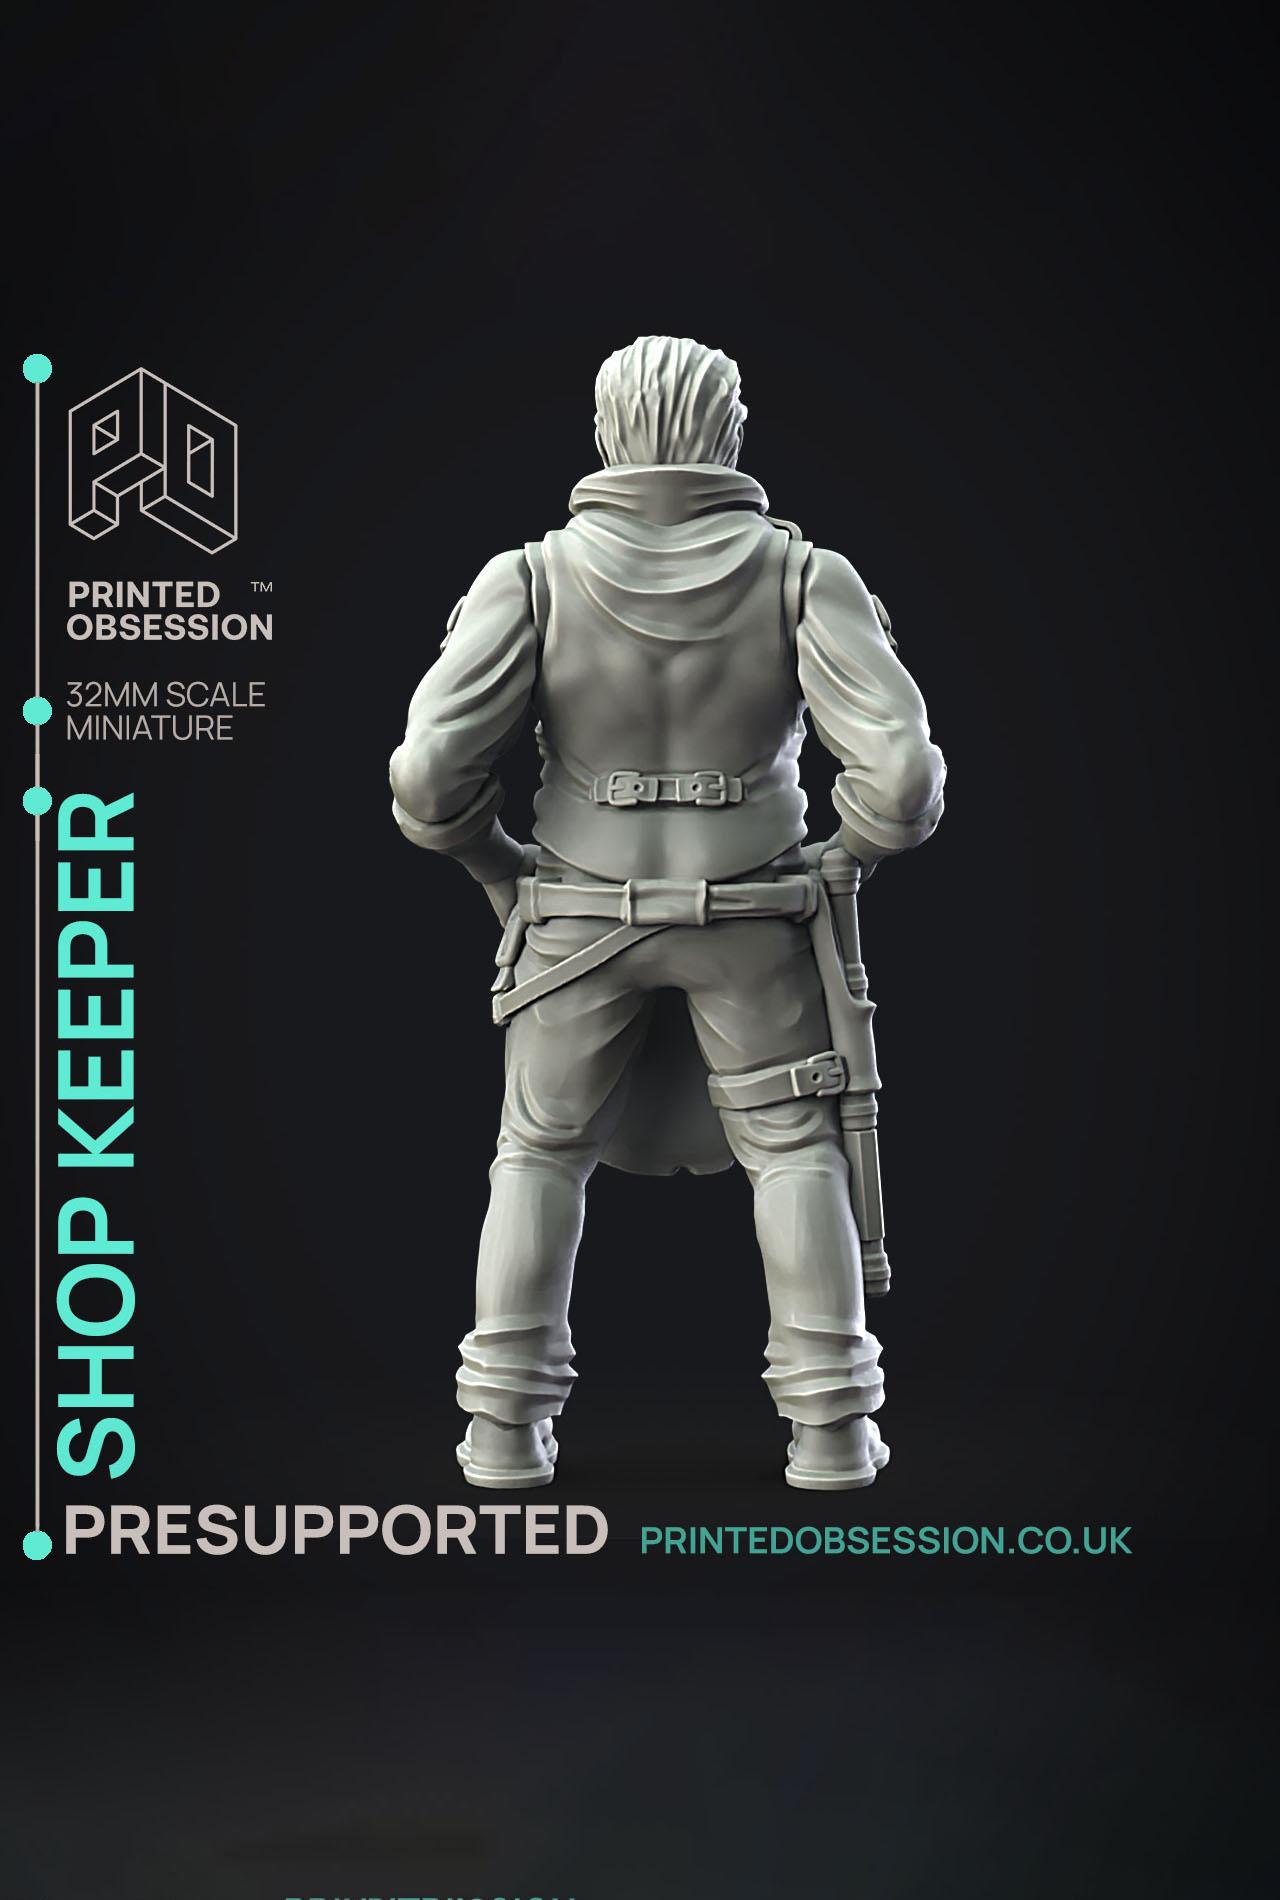 Shop Keeper  - Side Quest Shop - PRESUPPORTED - Illustrated and Stats - 32mm scale			 3d model